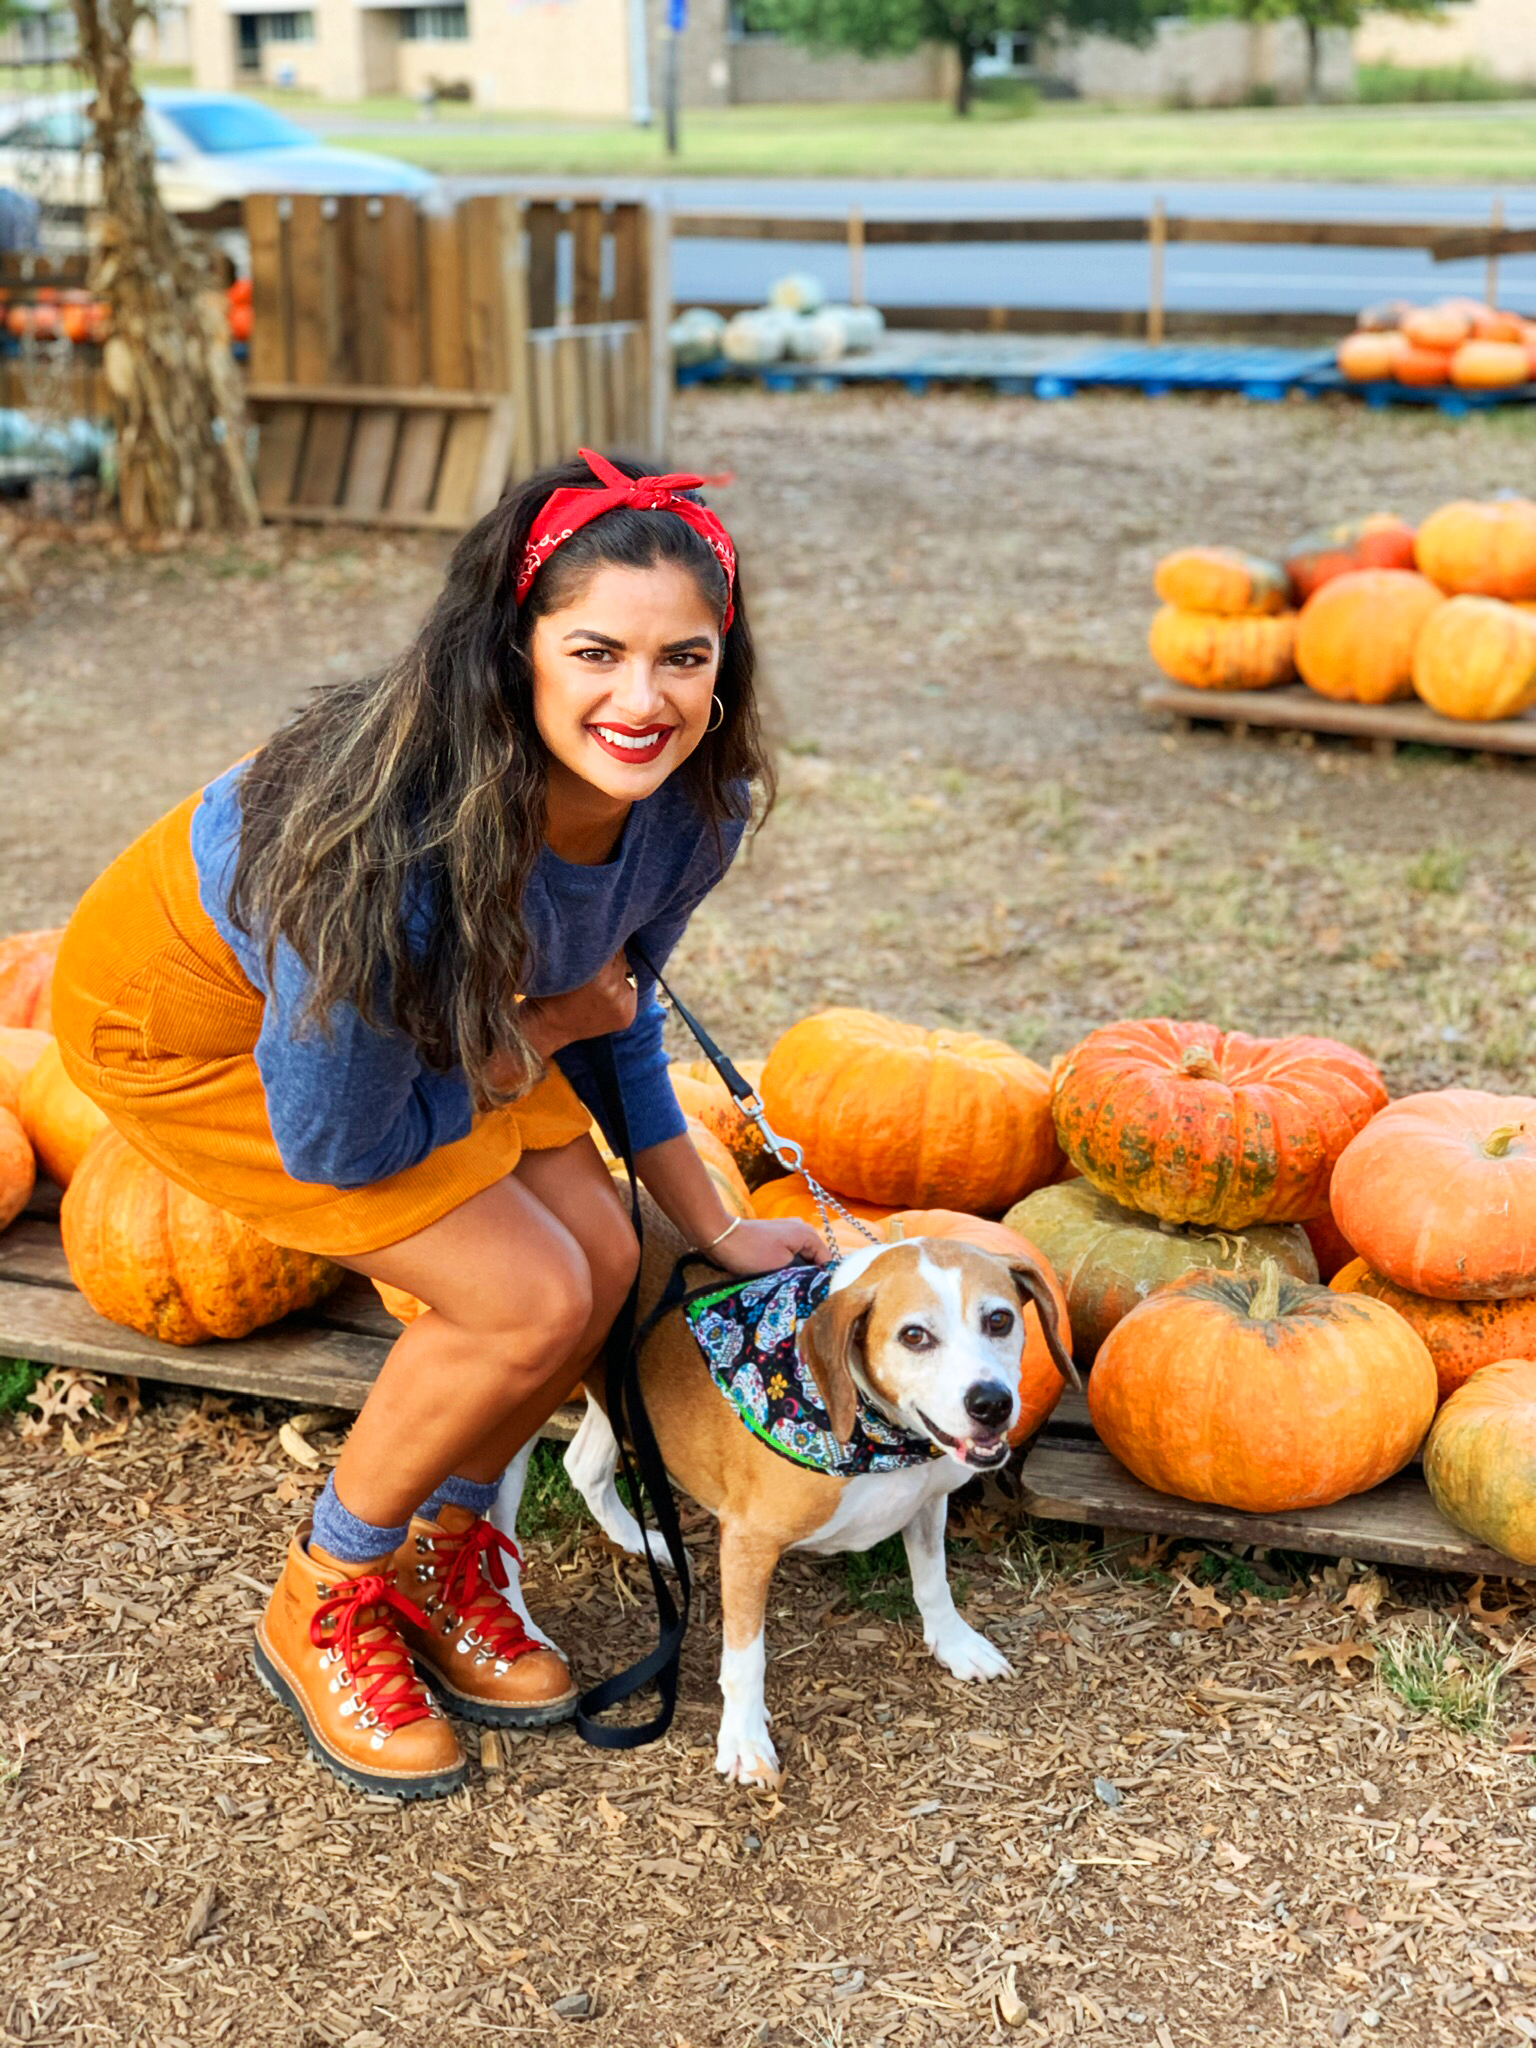 Priya the Blog, Nashville fashion blog, Nashville style blog, Nashville fashion blogger, Nashville style blogger, Fall outfit, Fall outfit idea, what to wear to a pumpkin patch, pumpkin patch outfit, Danner boots, corduroy skirt, how to style Danner boots, Autumn outfit idea, Fall outfit idea,